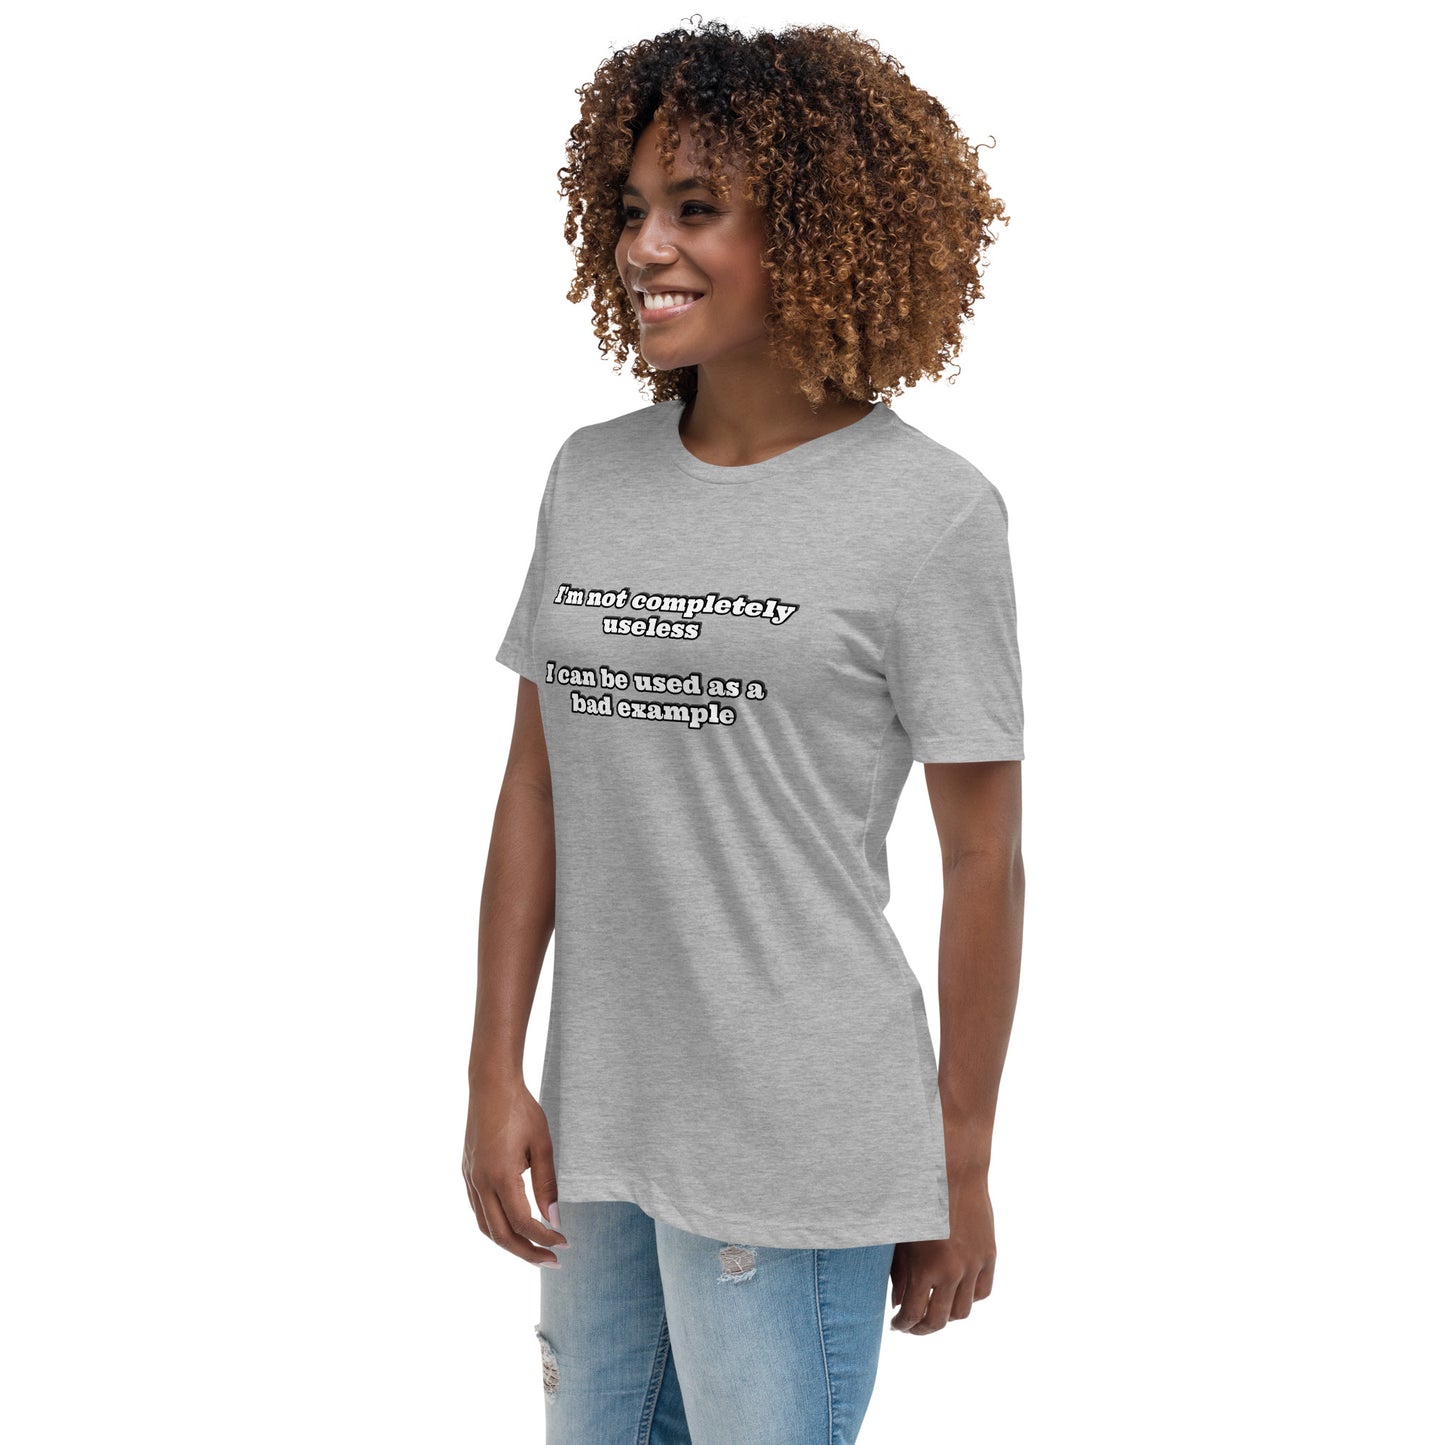 Women with grey t-shirt with text “I'm not completely useless I can be used as a bad example”